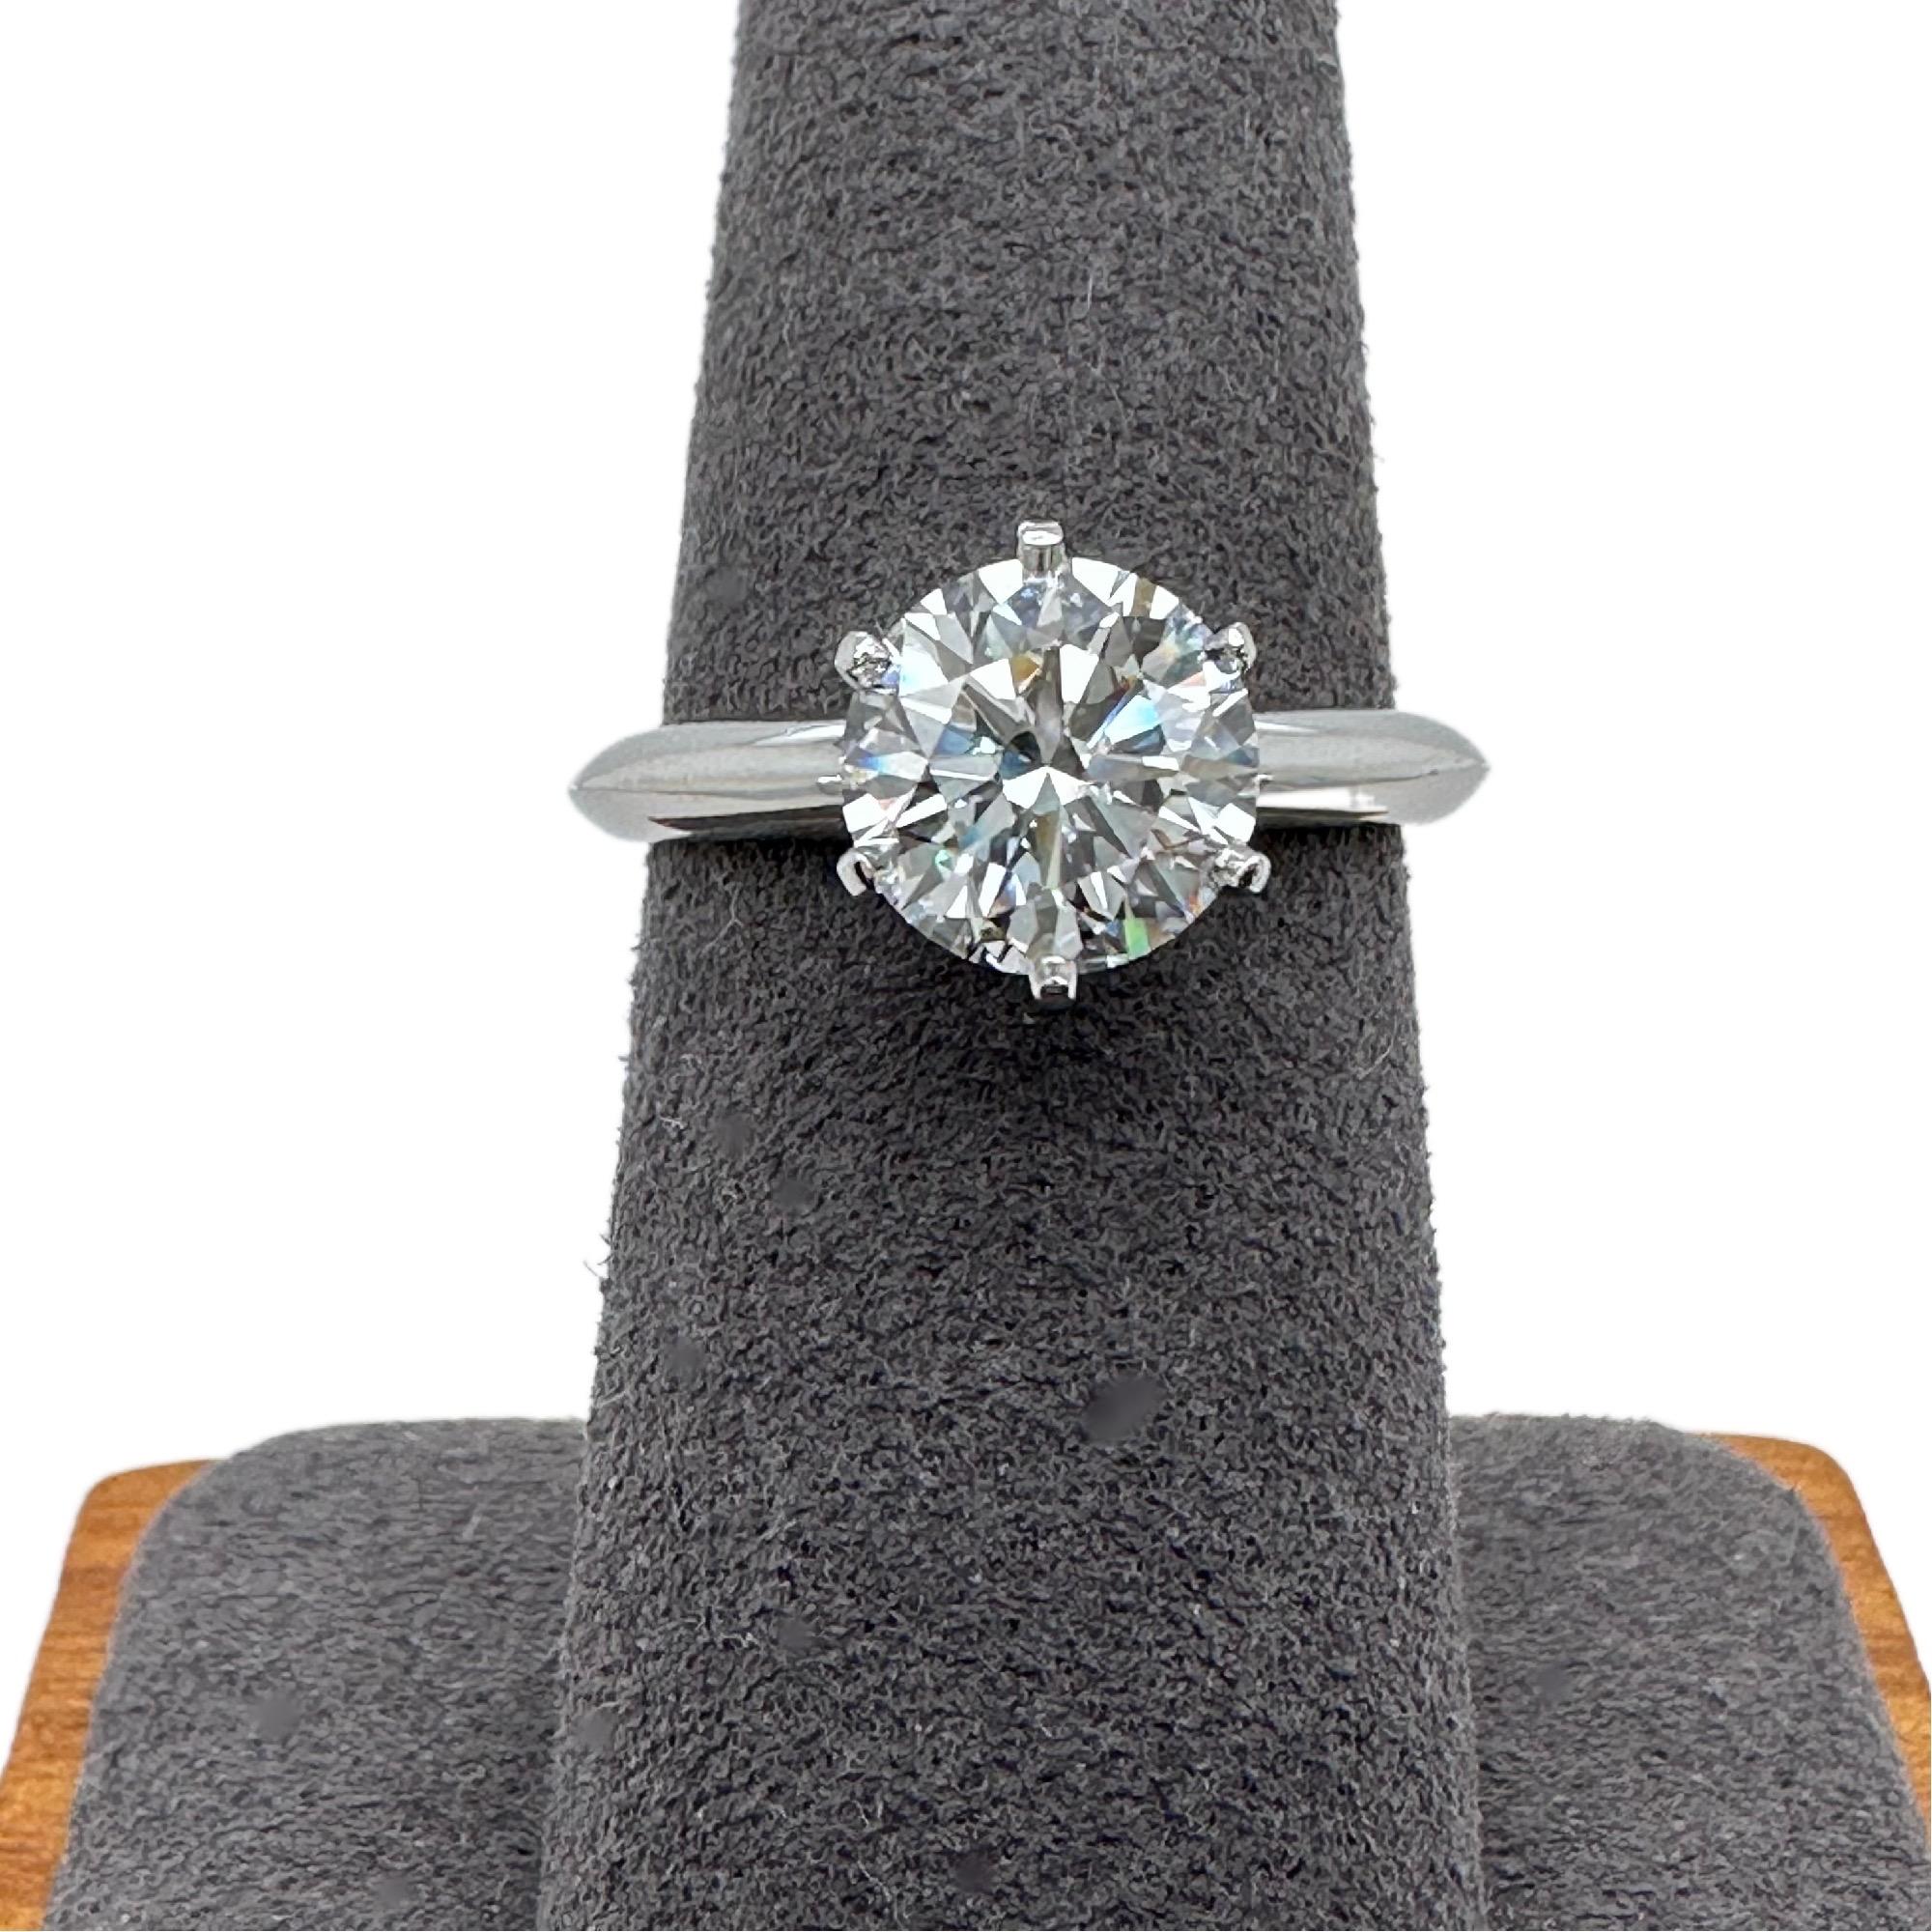 Tiffany & Co. Round Diamond 1.85cts E VS1 Solitaire Engagement Ring Platinum For Sale 5